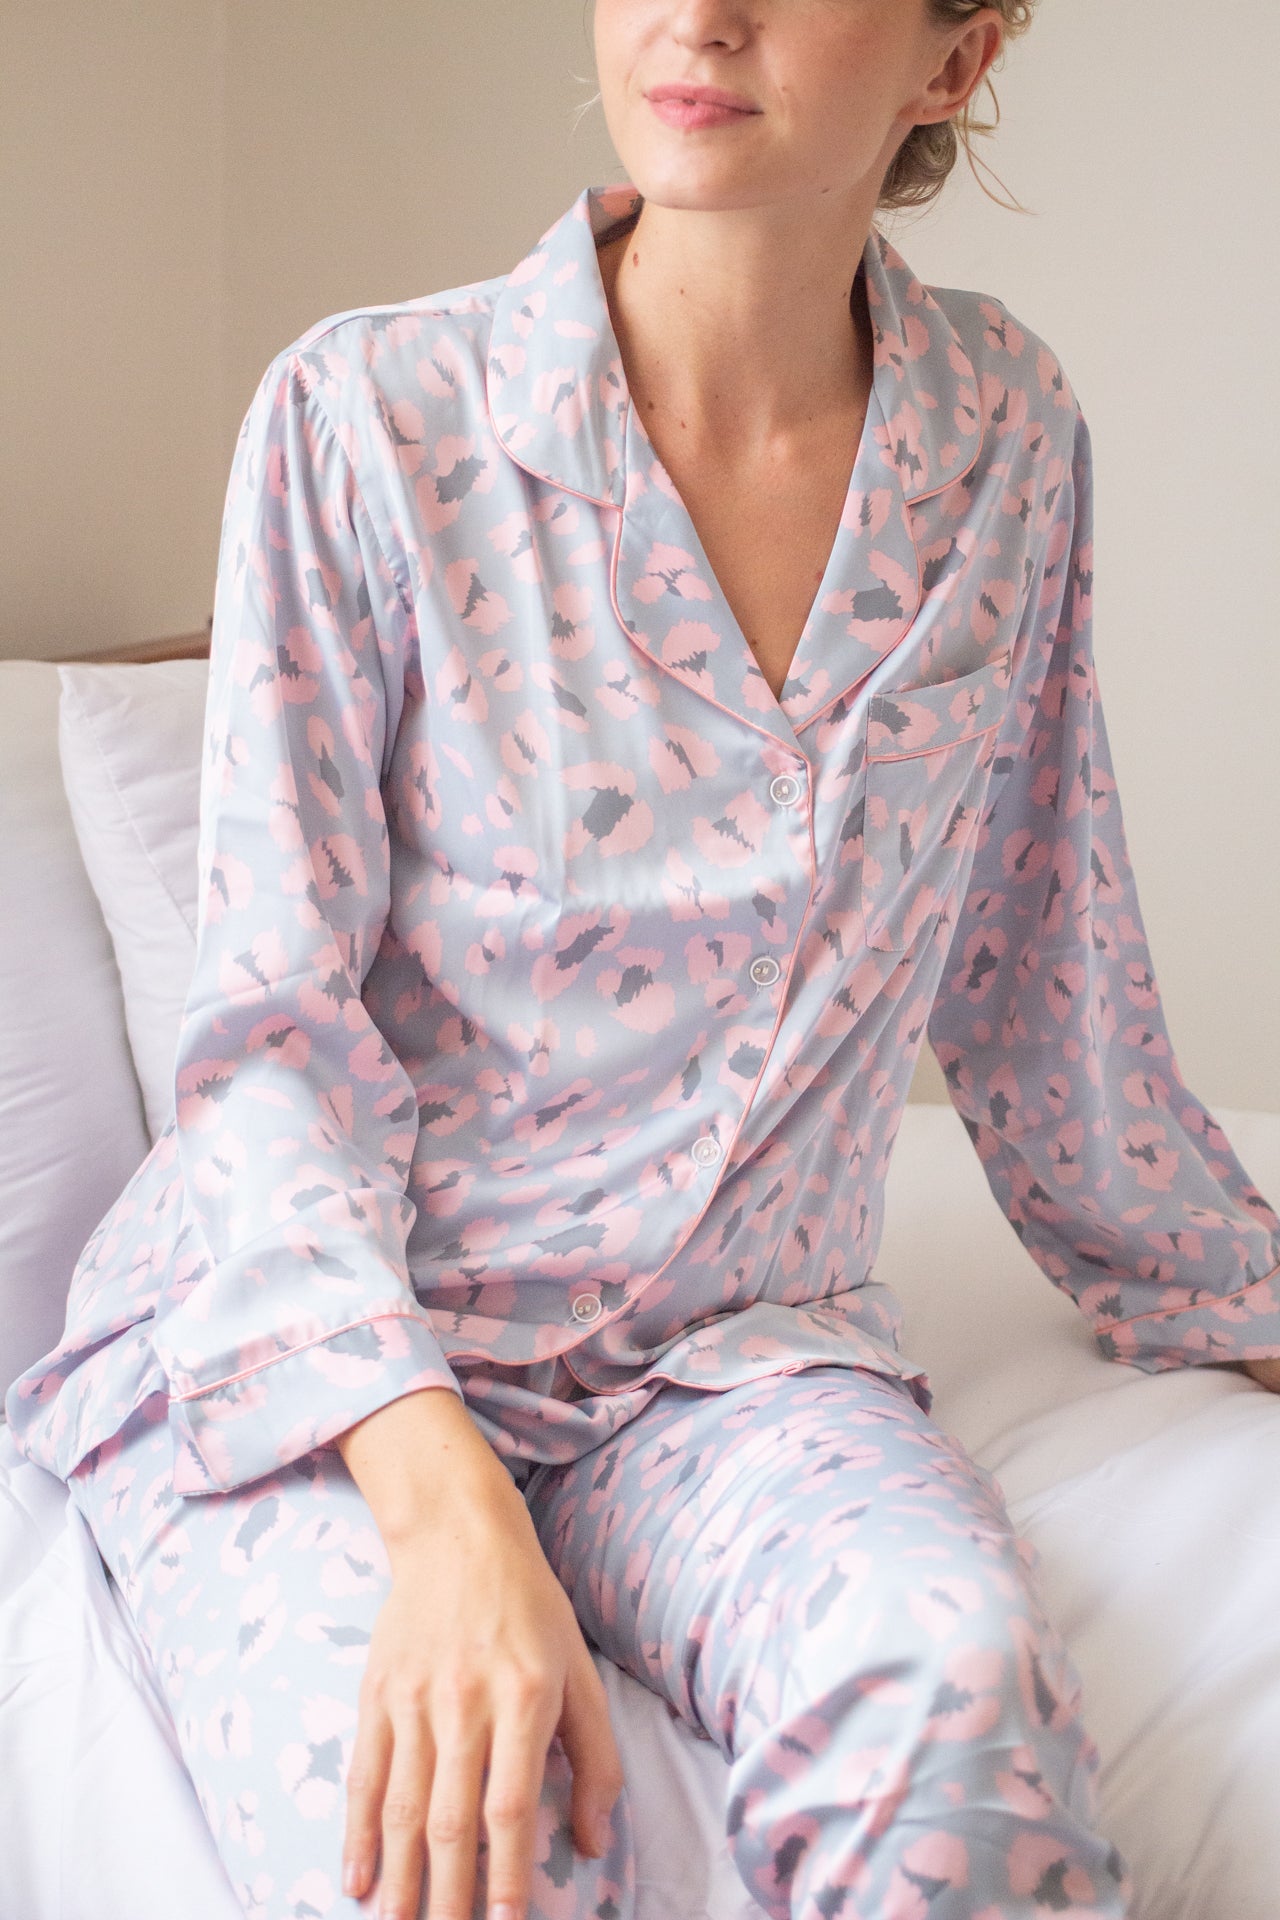 A woman sitting on the bed wearing long sleeve pajama set